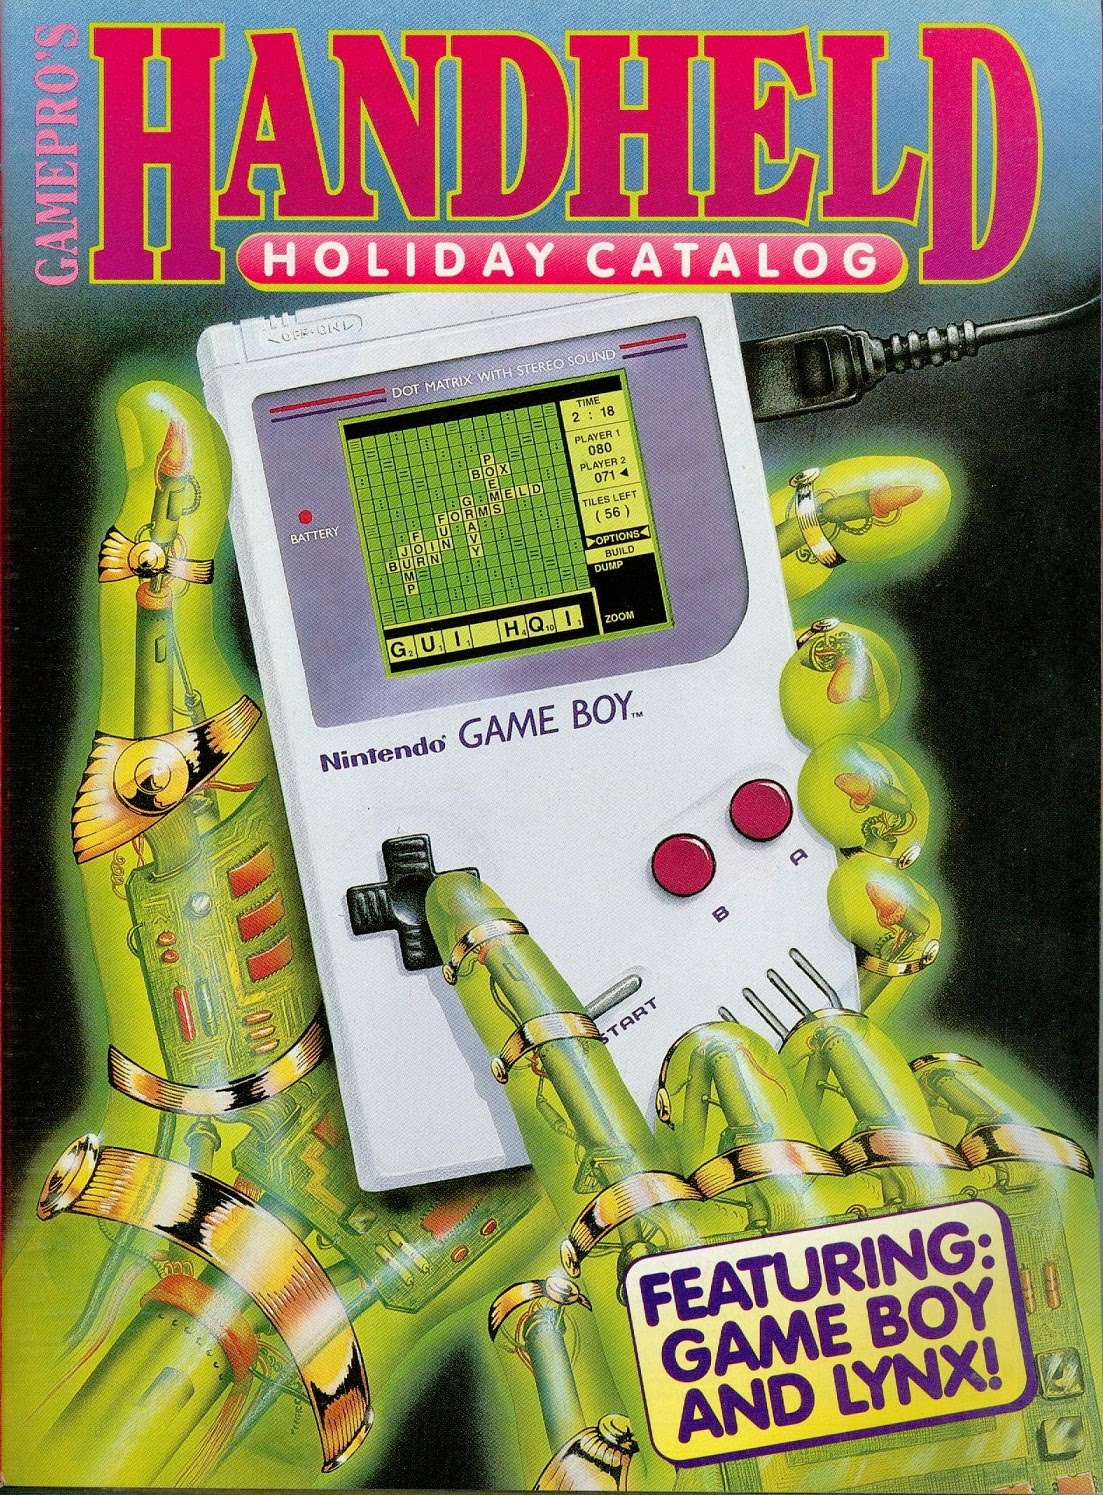 Game Boy: How To Get Ahead In Handheld Advertising - What 